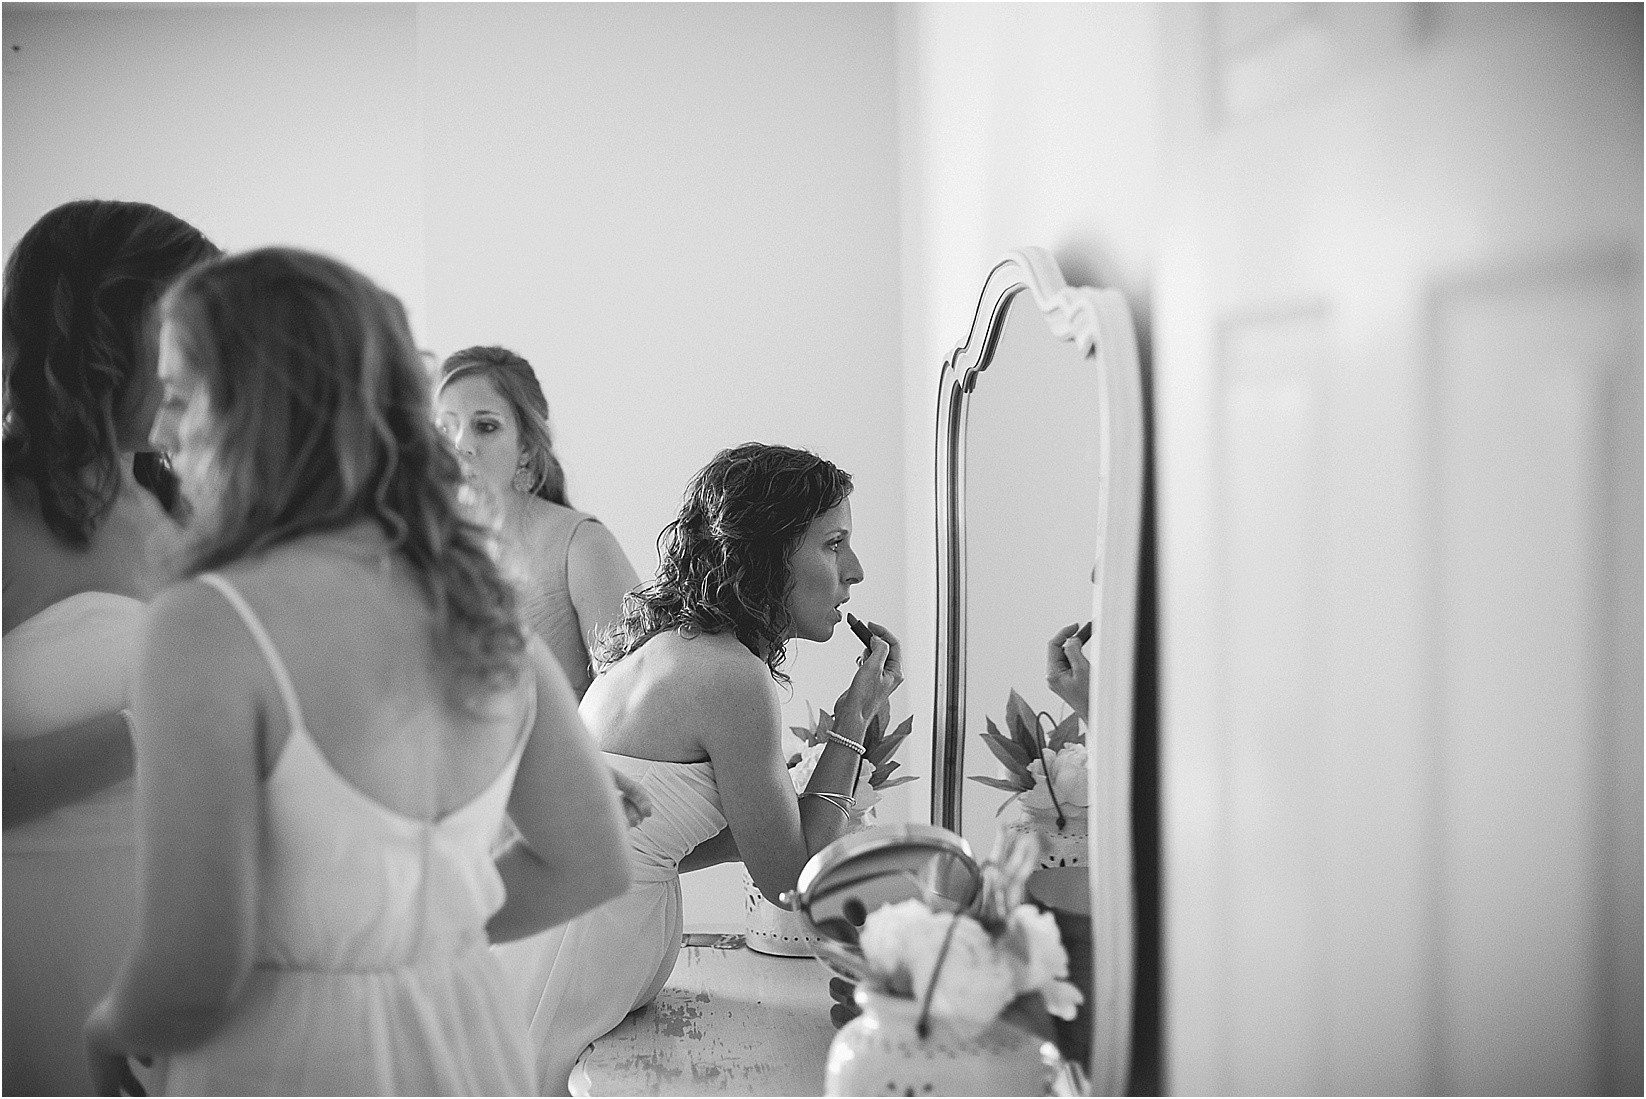 putting make up on during their wedding at the Historic Rural Hill wedding ceremony and reception in Huntersville nc